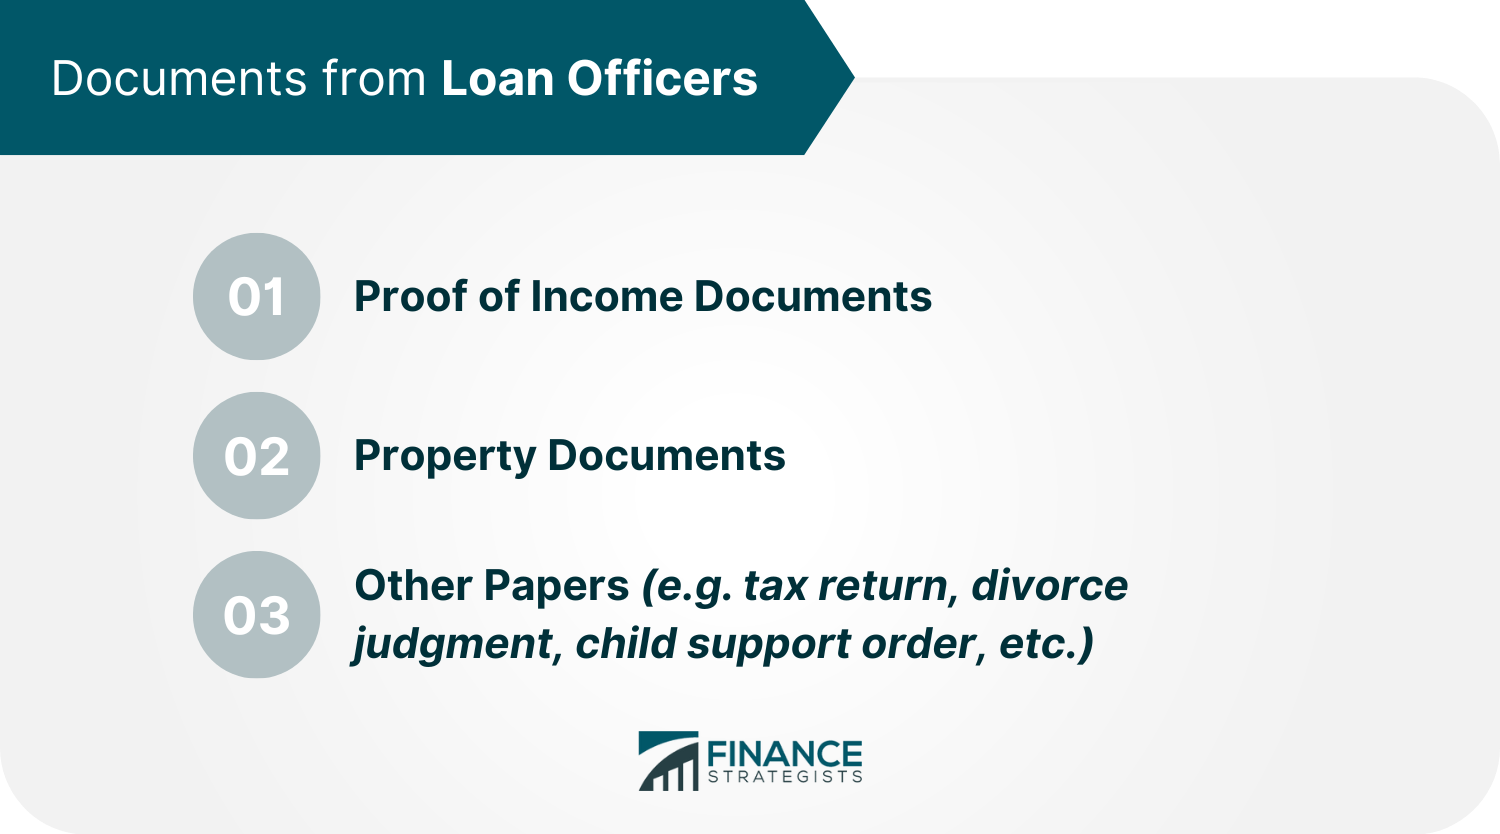 Documents from Loan Officers